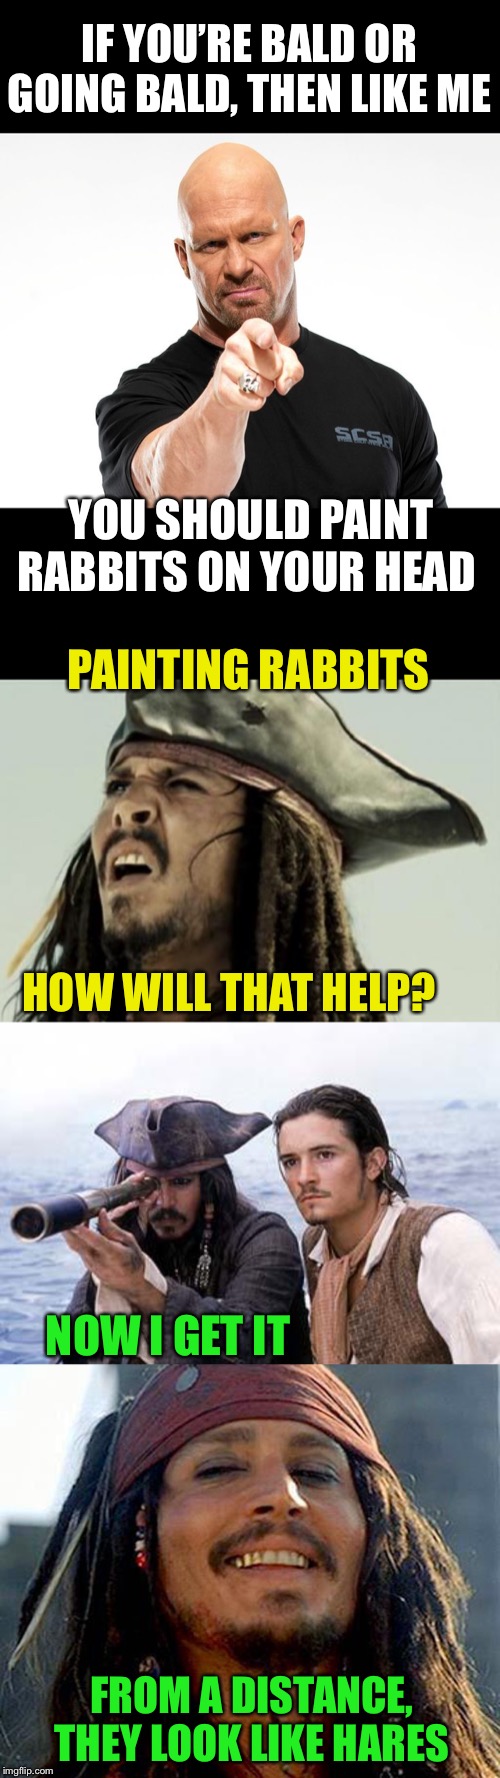 Some stone cold wrong advice for baldies | IF YOU’RE BALD OR GOING BALD, THEN LIKE ME; YOU SHOULD PAINT RABBITS ON YOUR HEAD; PAINTING RABBITS; HOW WILL THAT HELP? NOW I GET IT; FROM A DISTANCE, THEY LOOK LIKE HARES | image tagged in pirate telescope,confused dafuq jack sparrow what,bald tough guy pointing at you,rabbits,hares,who cares | made w/ Imgflip meme maker